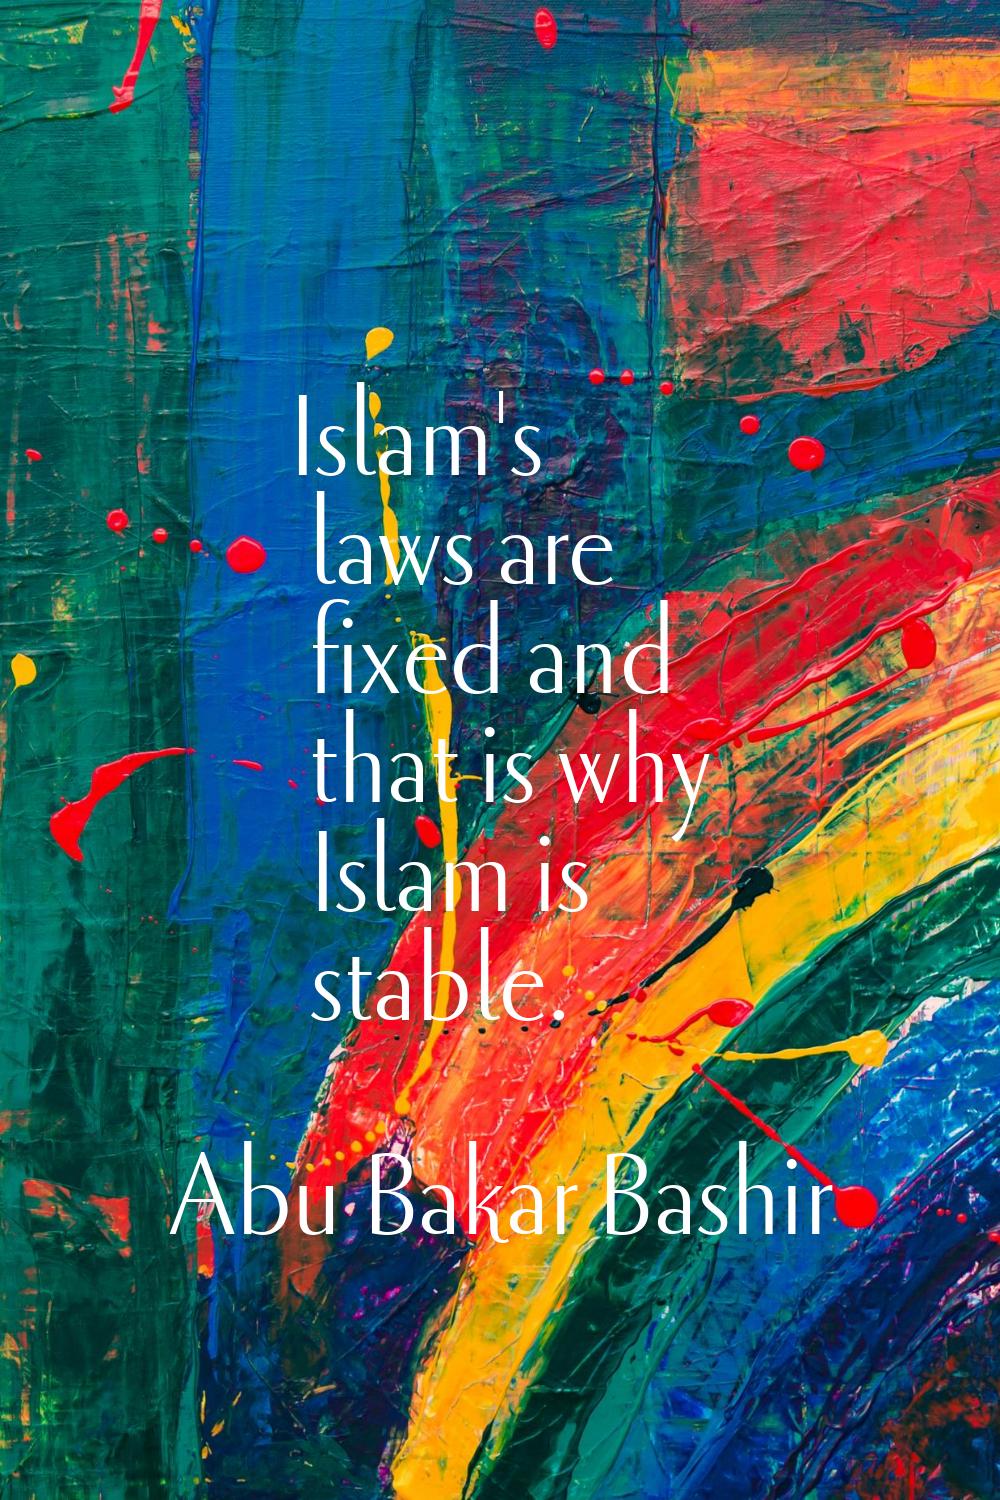 Islam's laws are fixed and that is why Islam is stable.